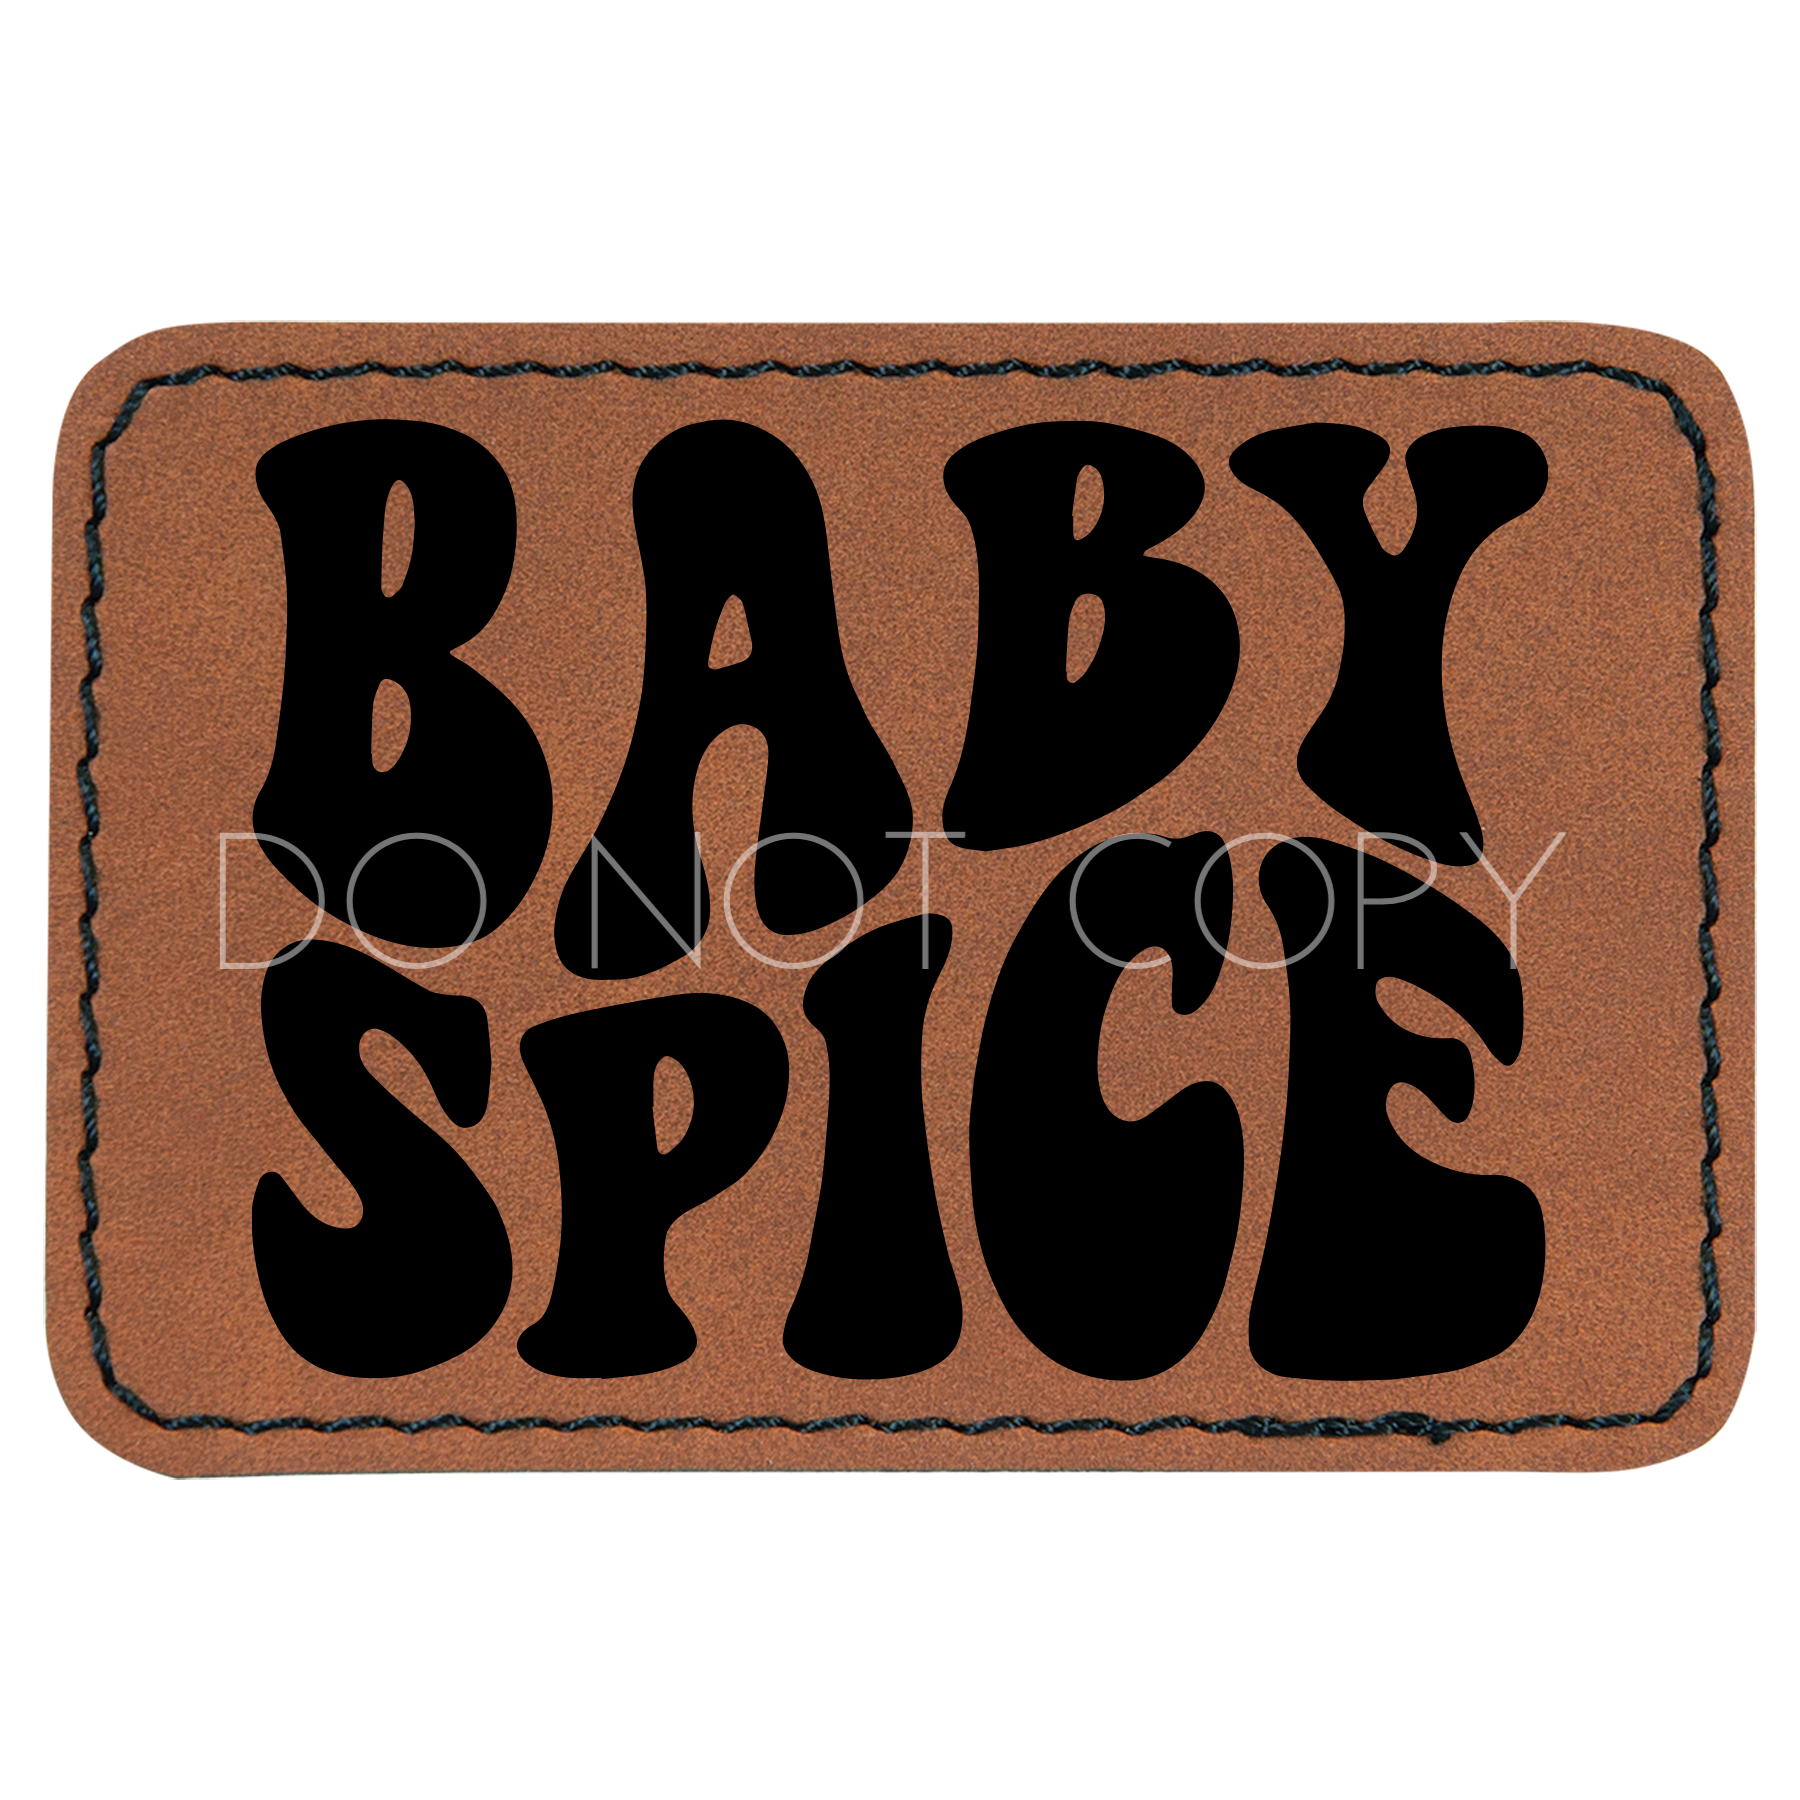 Baby Spice Patch